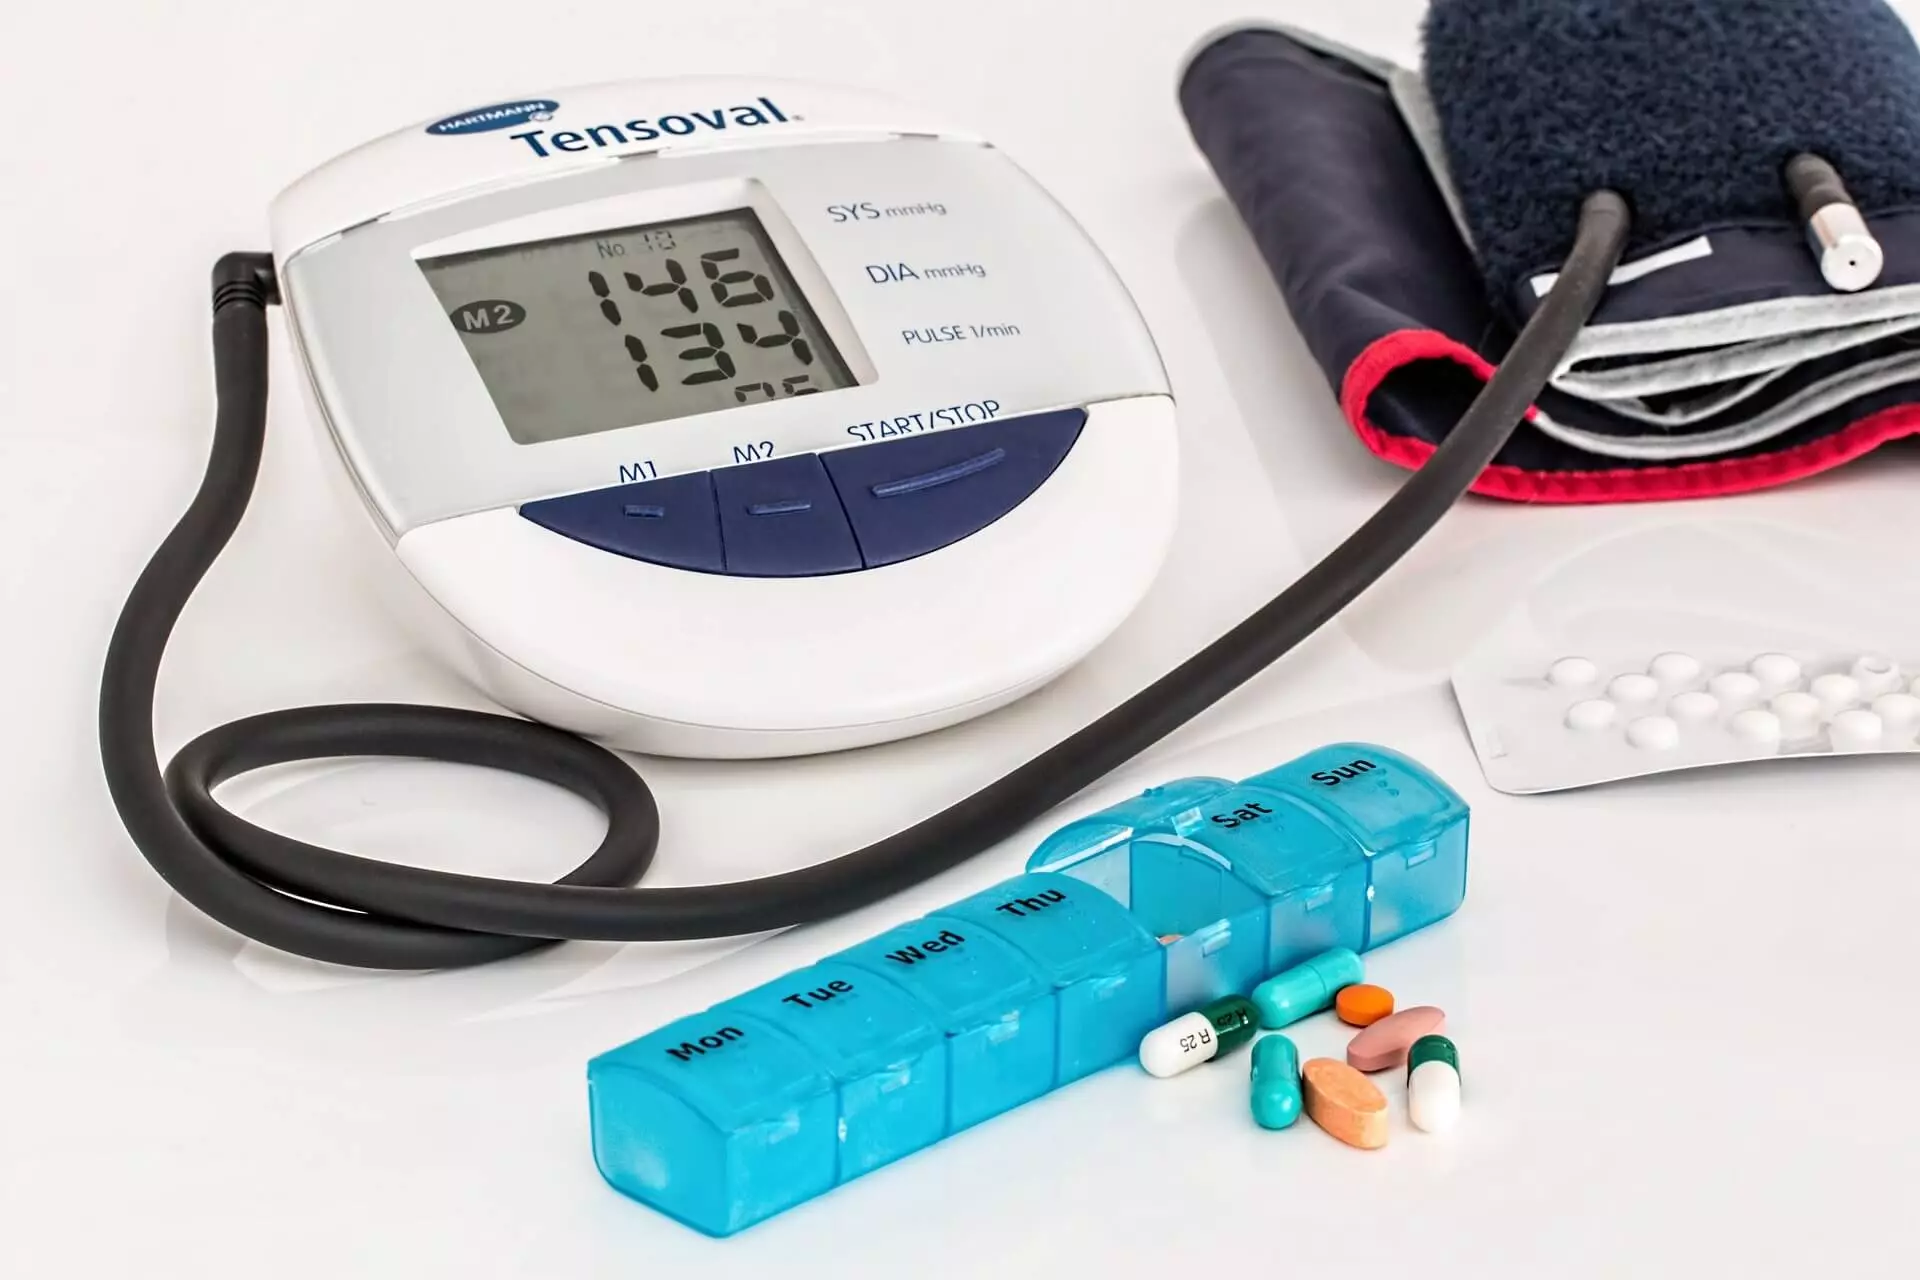 Monitoring your blood pressure at home